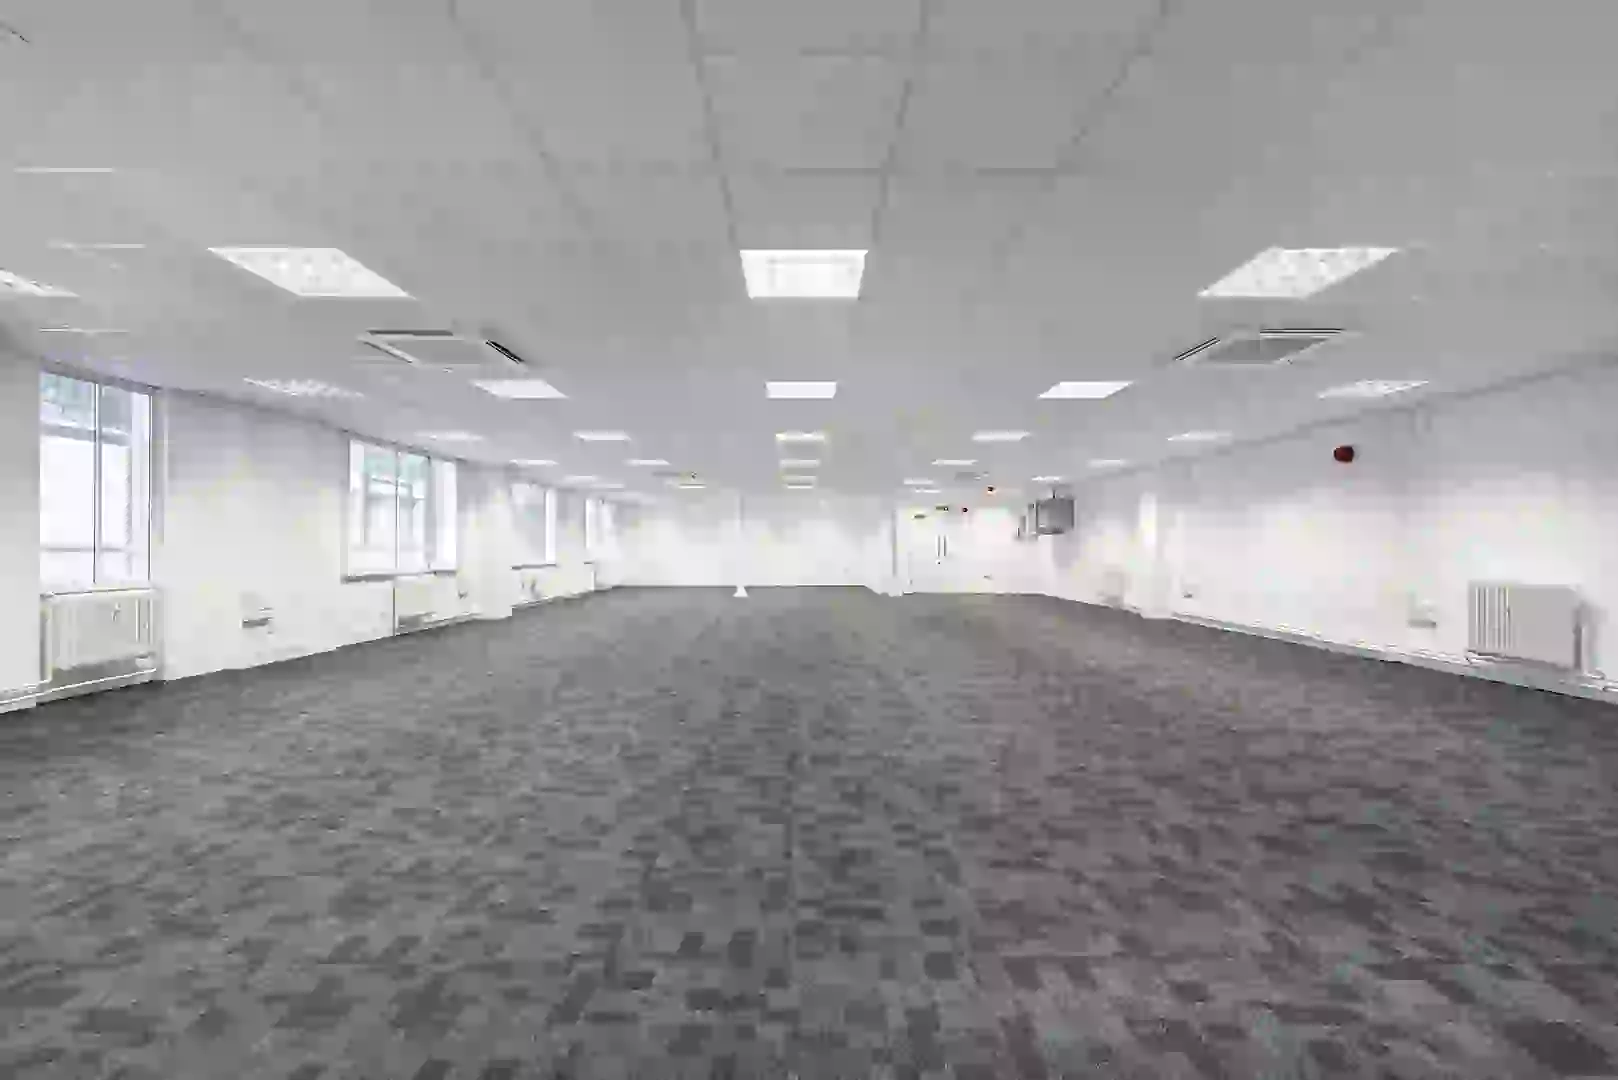 Office space to rent at China Works, Black Prince Road, Vauxhall, London, unit SB.347/8, 2486 sq ft (230 sq m).